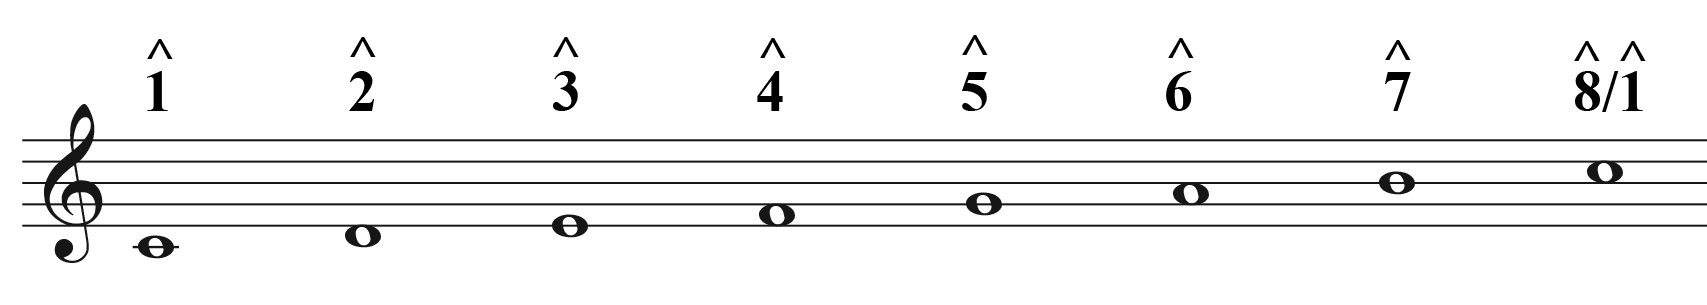 An ascending C major scale degrees with scale degrees shown.